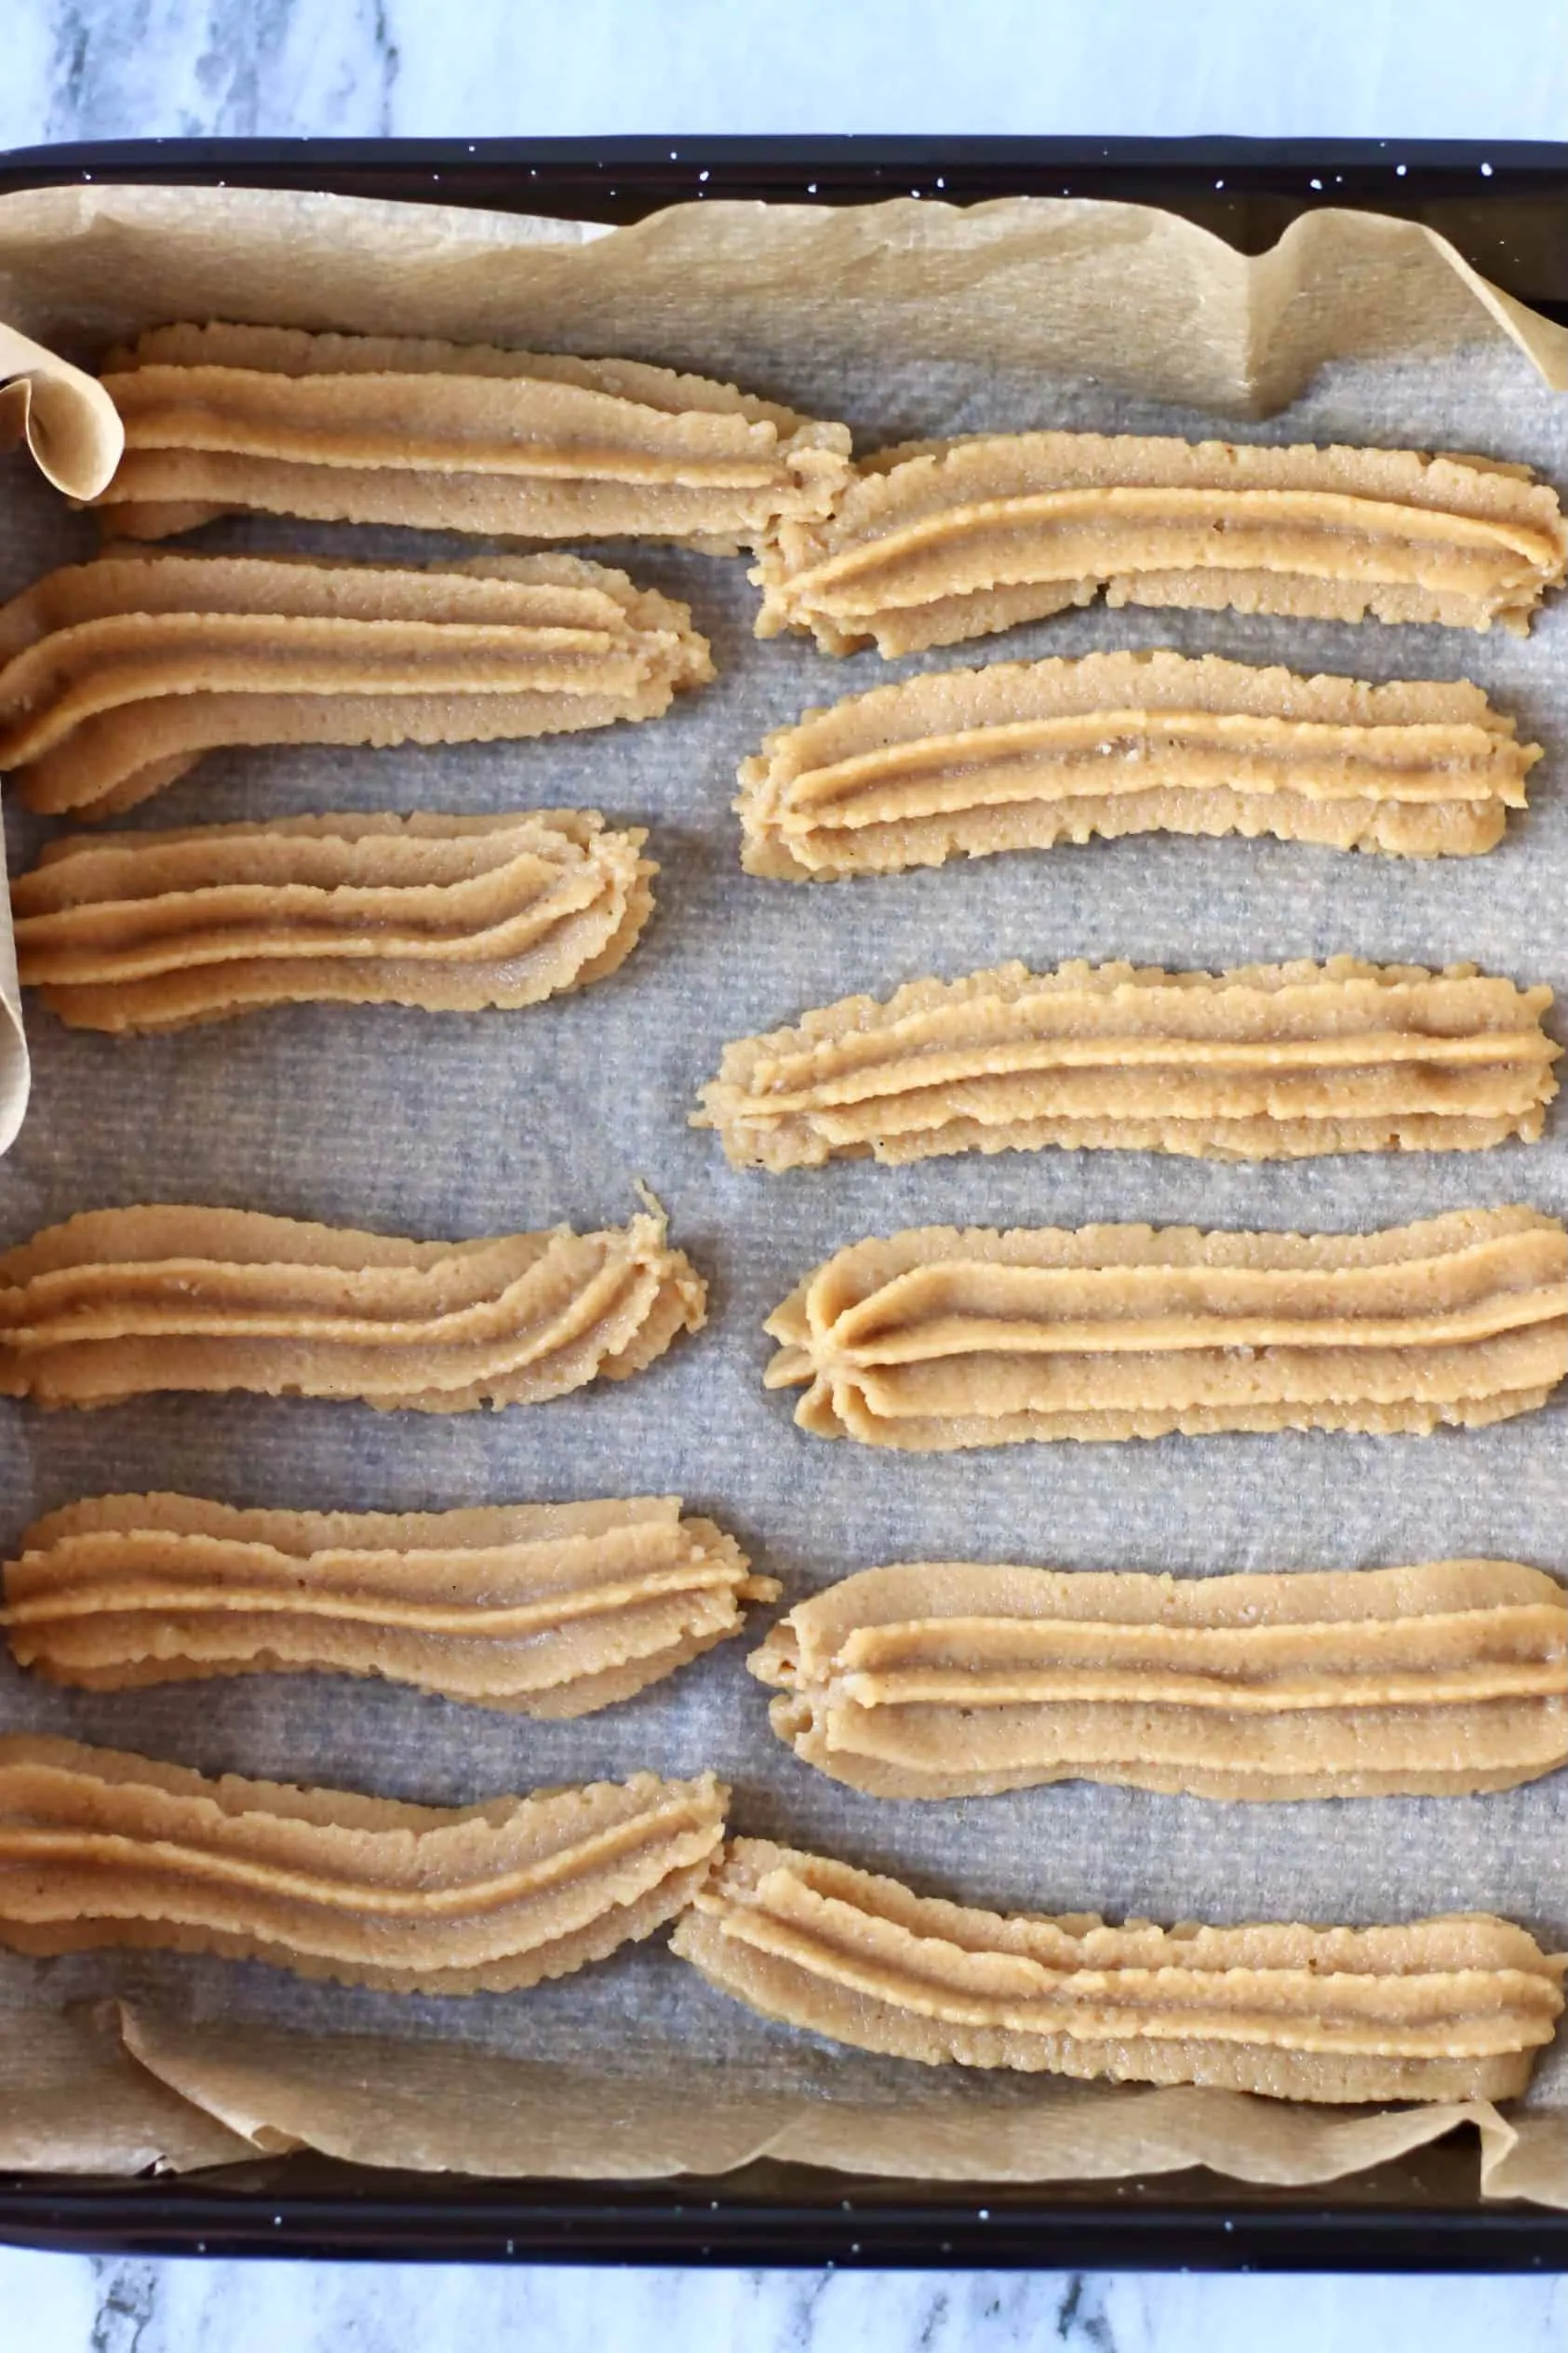 Twelve raw gluten-free vegan churros piped out onto a baking tray lined with baking paper